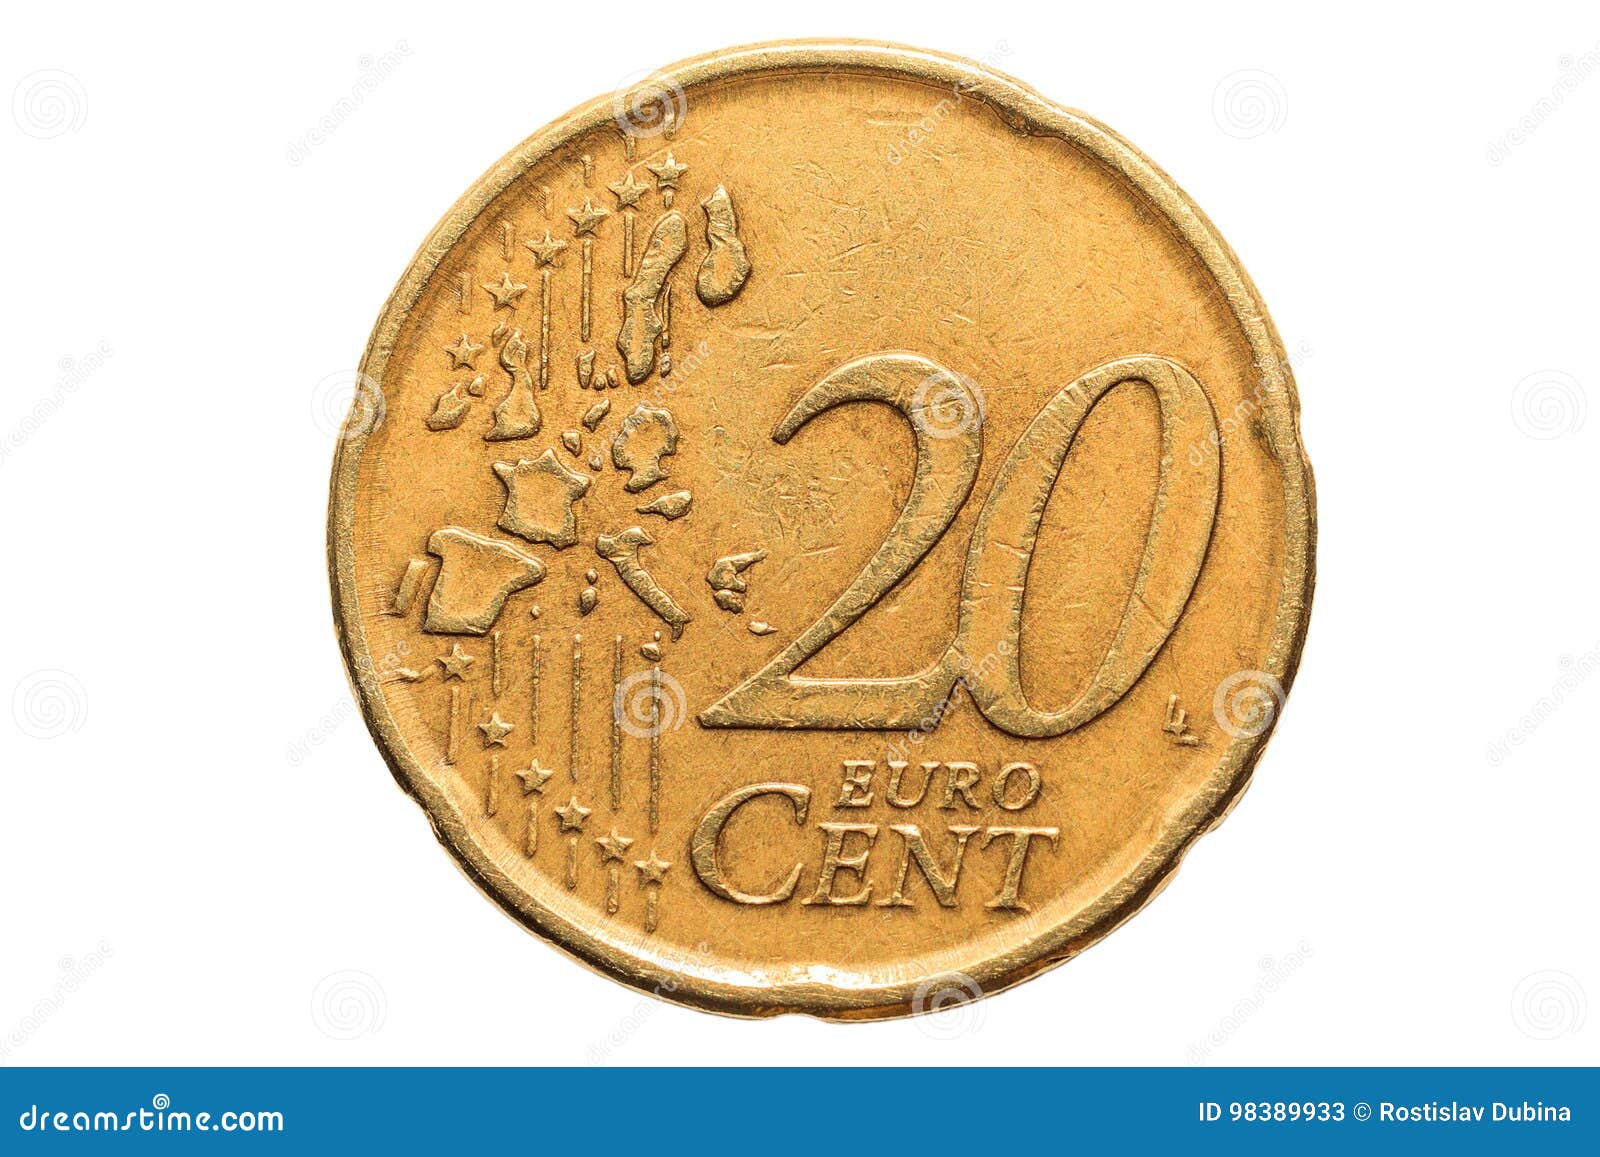 european coin with a nominal value of twenty euro cents  on white background. macro picture of european coins.